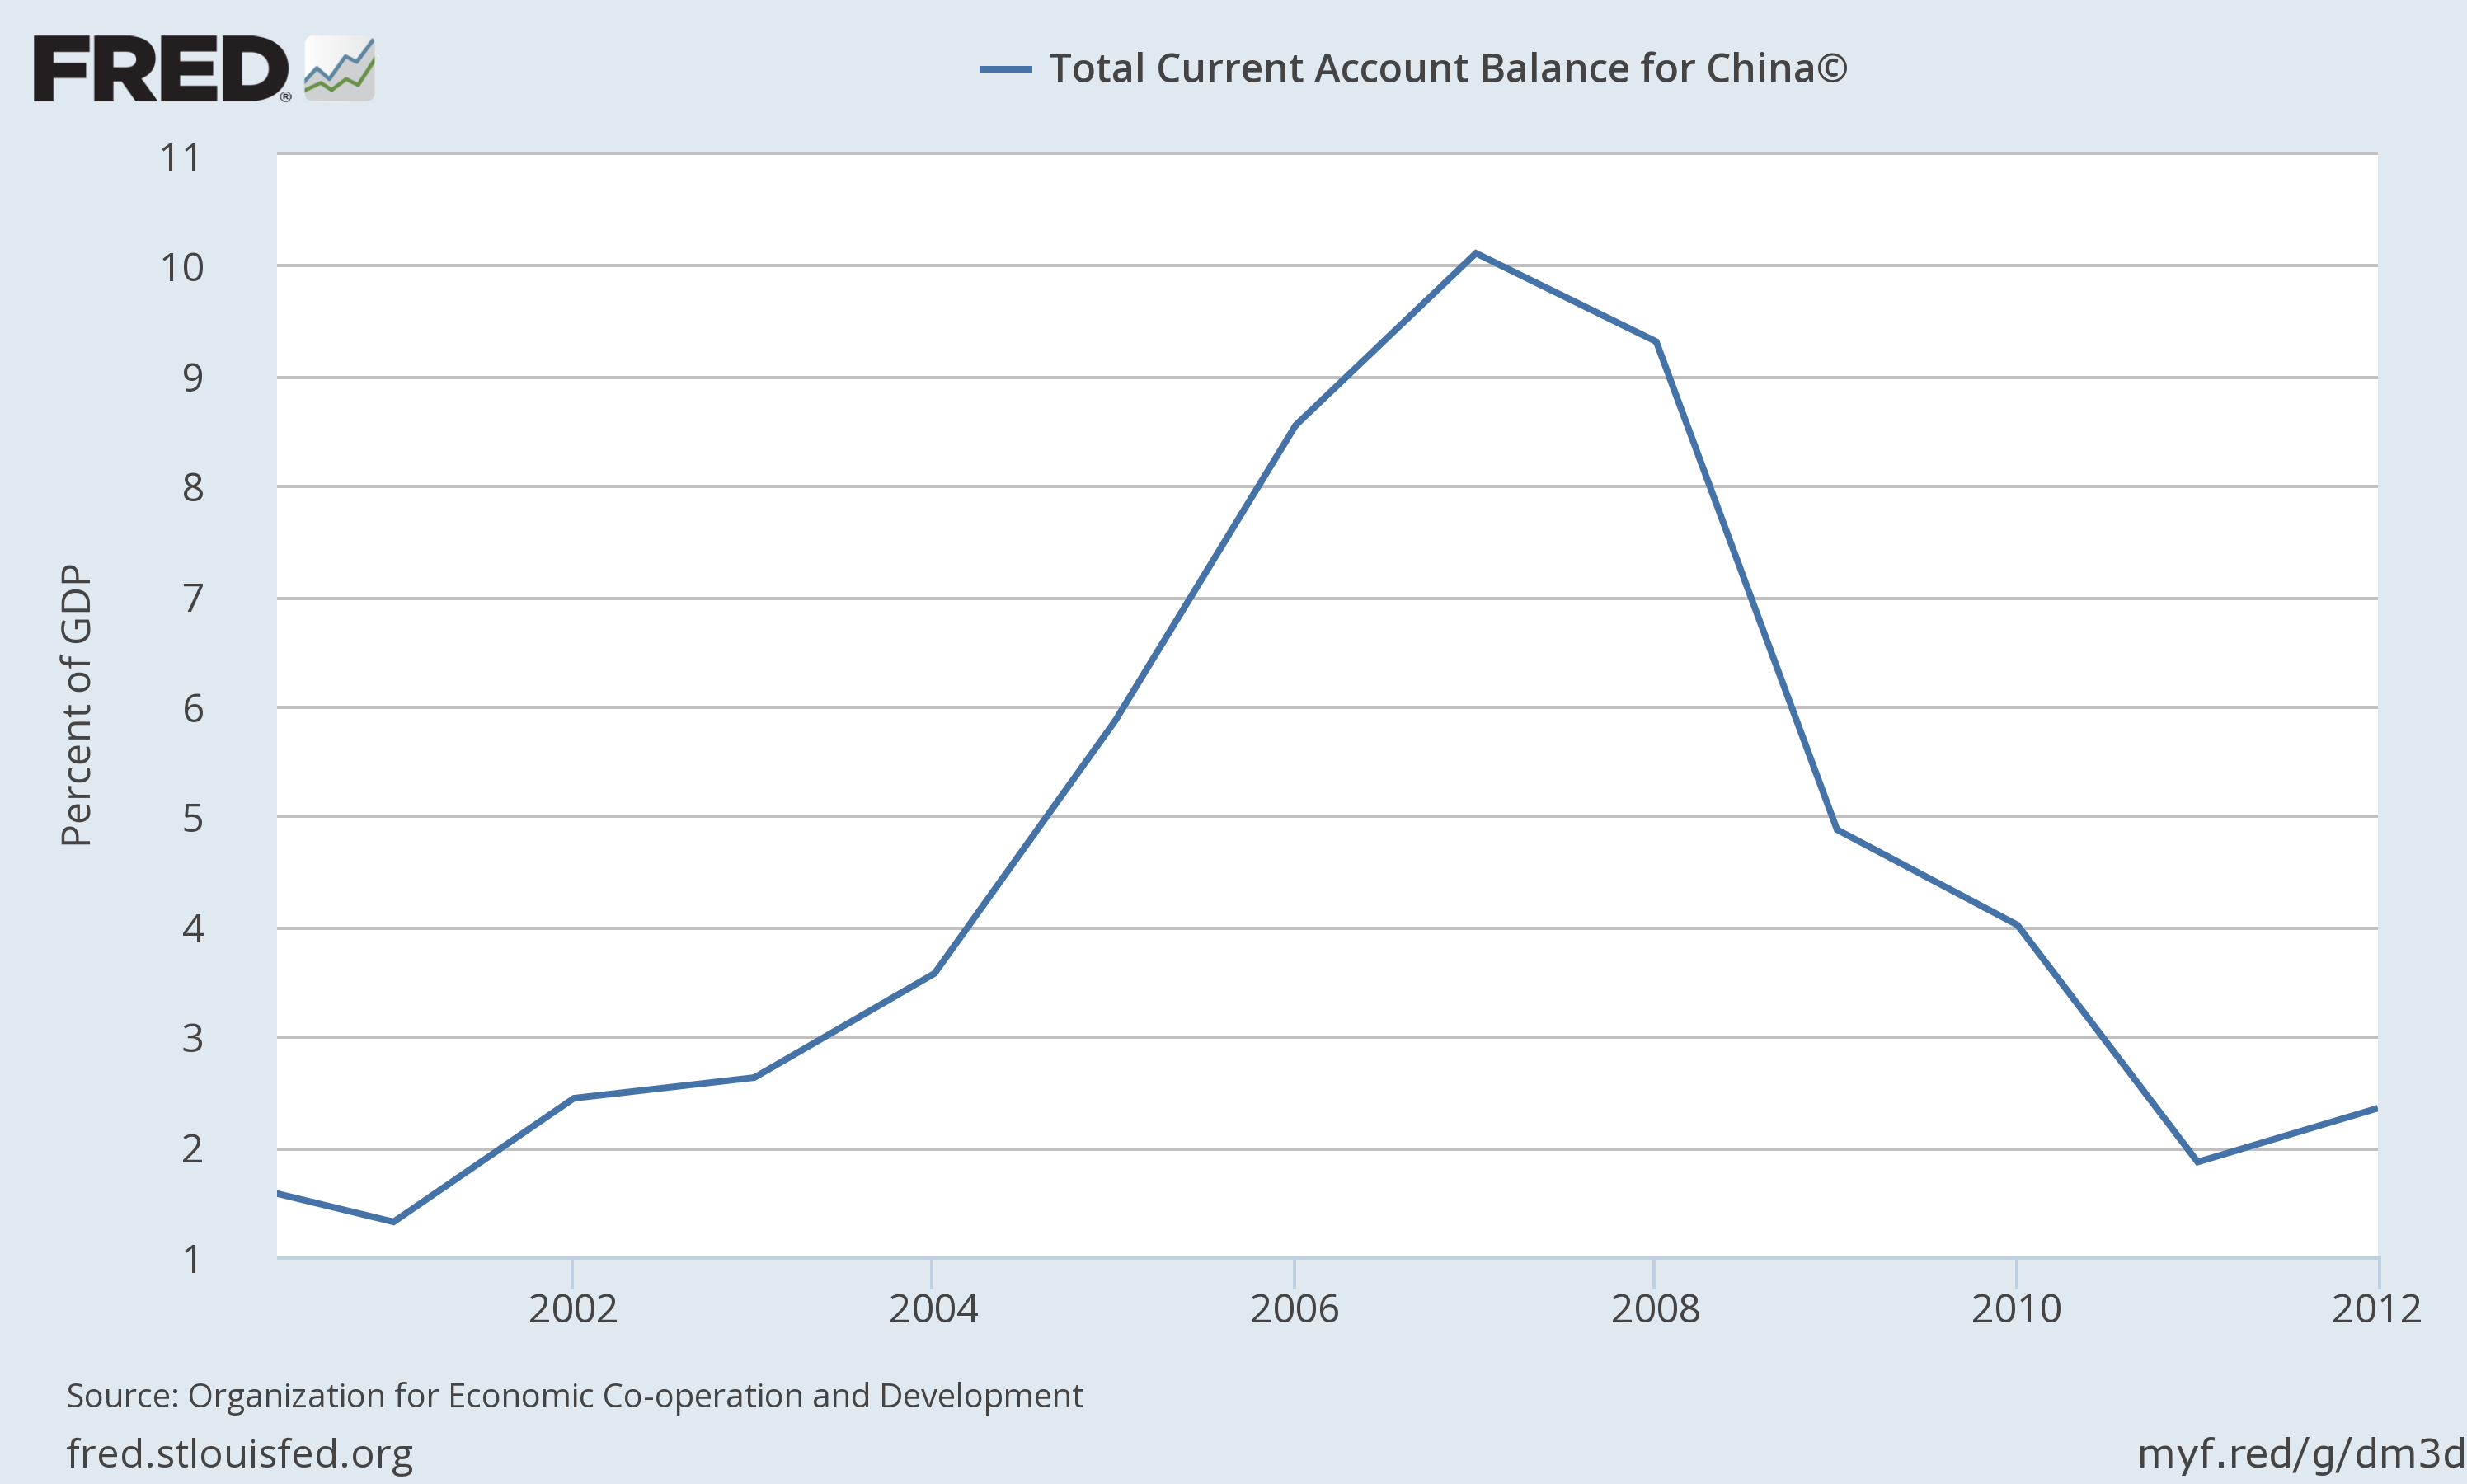 line graph showing the total current account balance for China